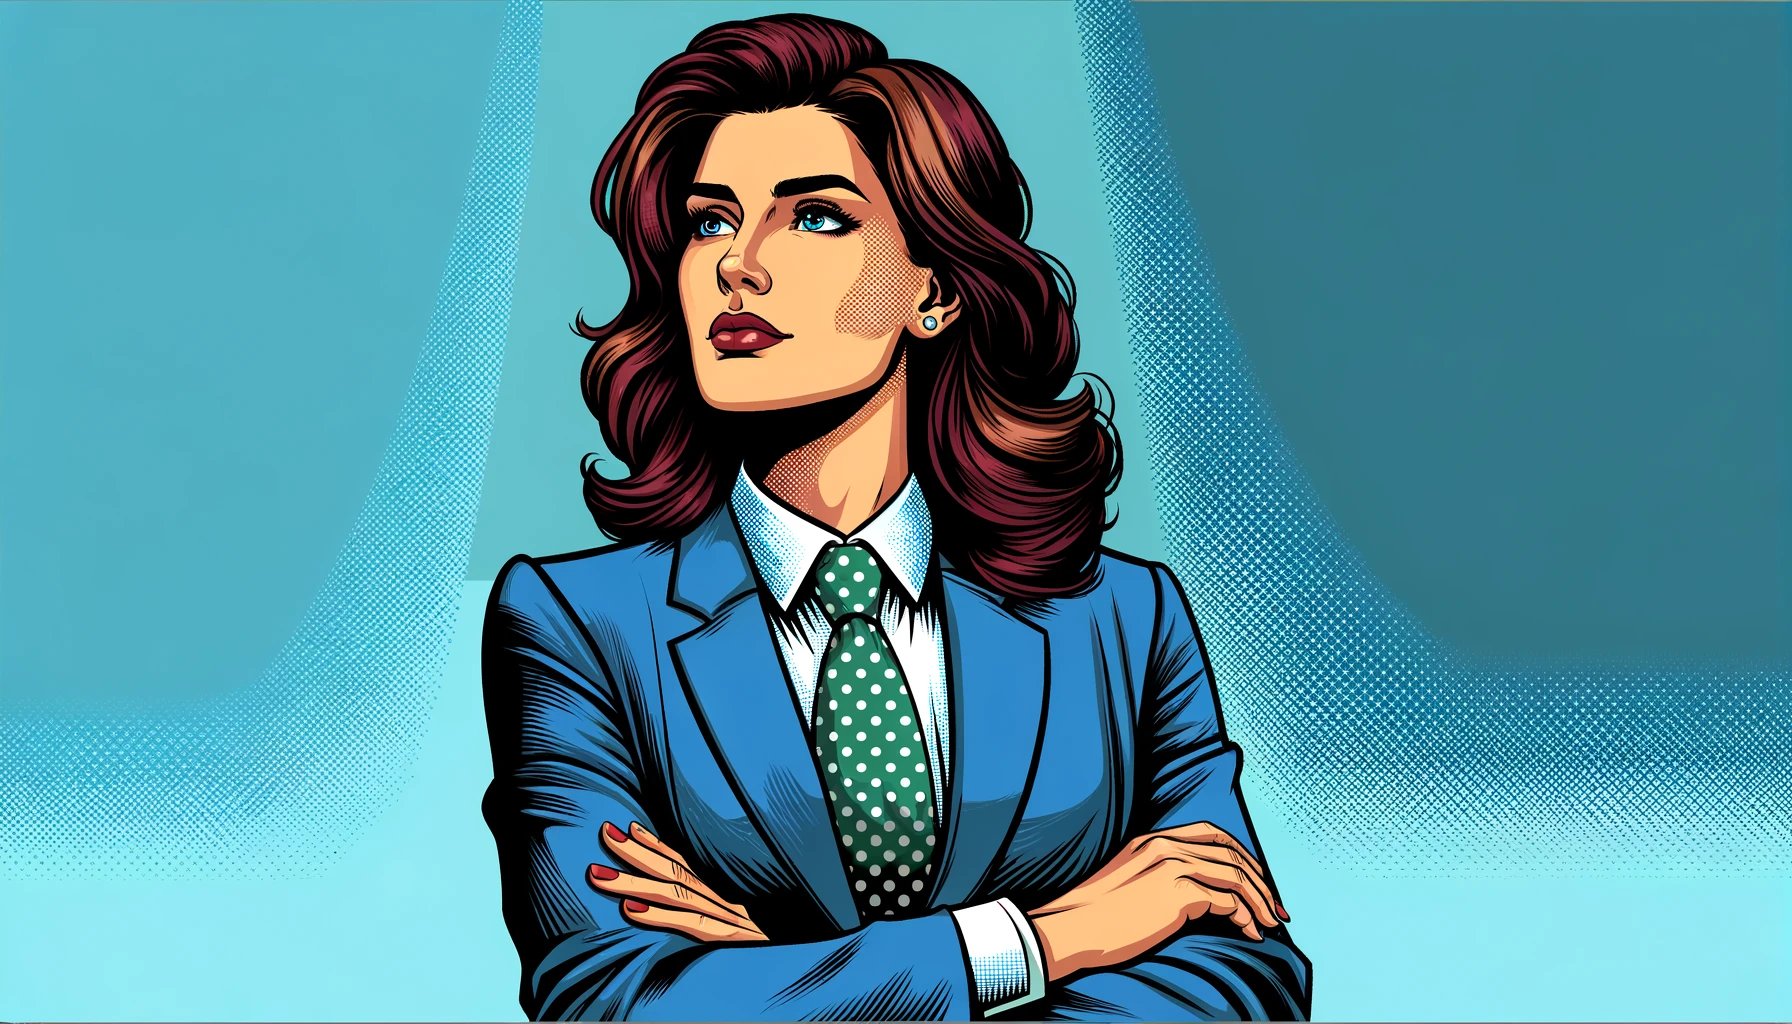 DALL·E 2024-04-15 16.48.58 - A professional and dignified portrayal of a female businesswoman in a vibrant pop art style illustration, focusing solely on her leadership and confid